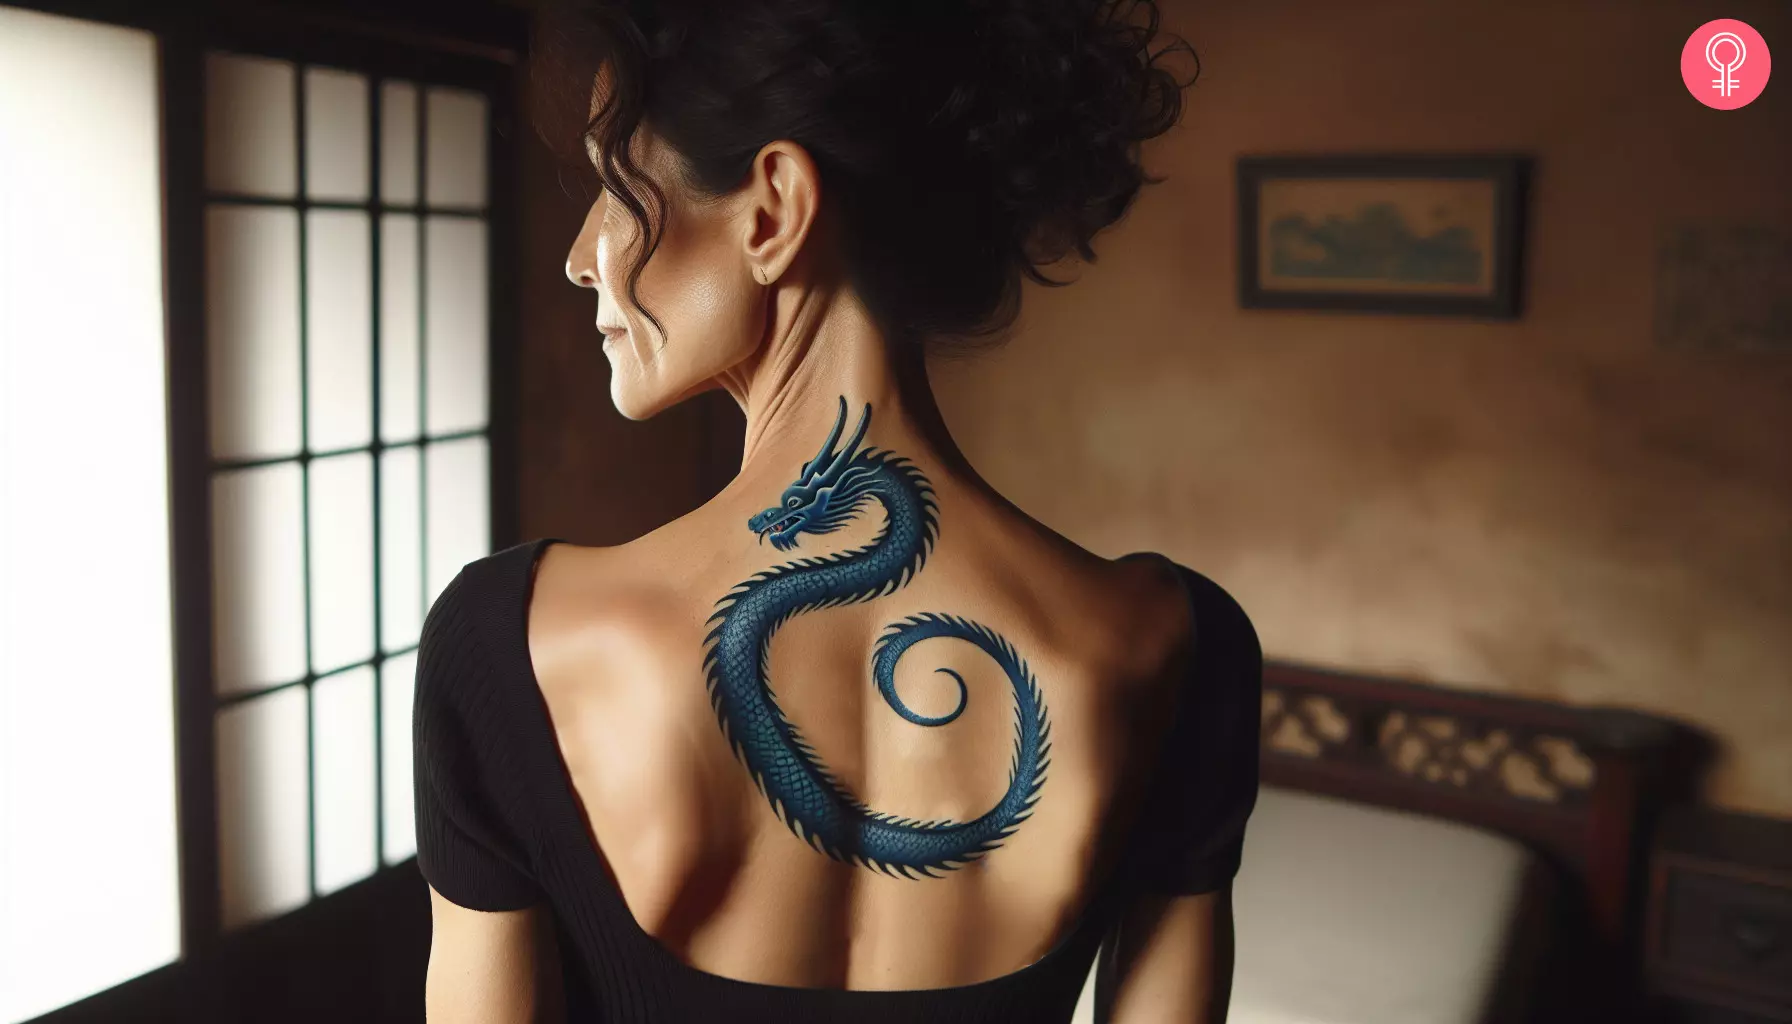 A blue serpentine Eastern dragon tattoo on the upper back of a woman